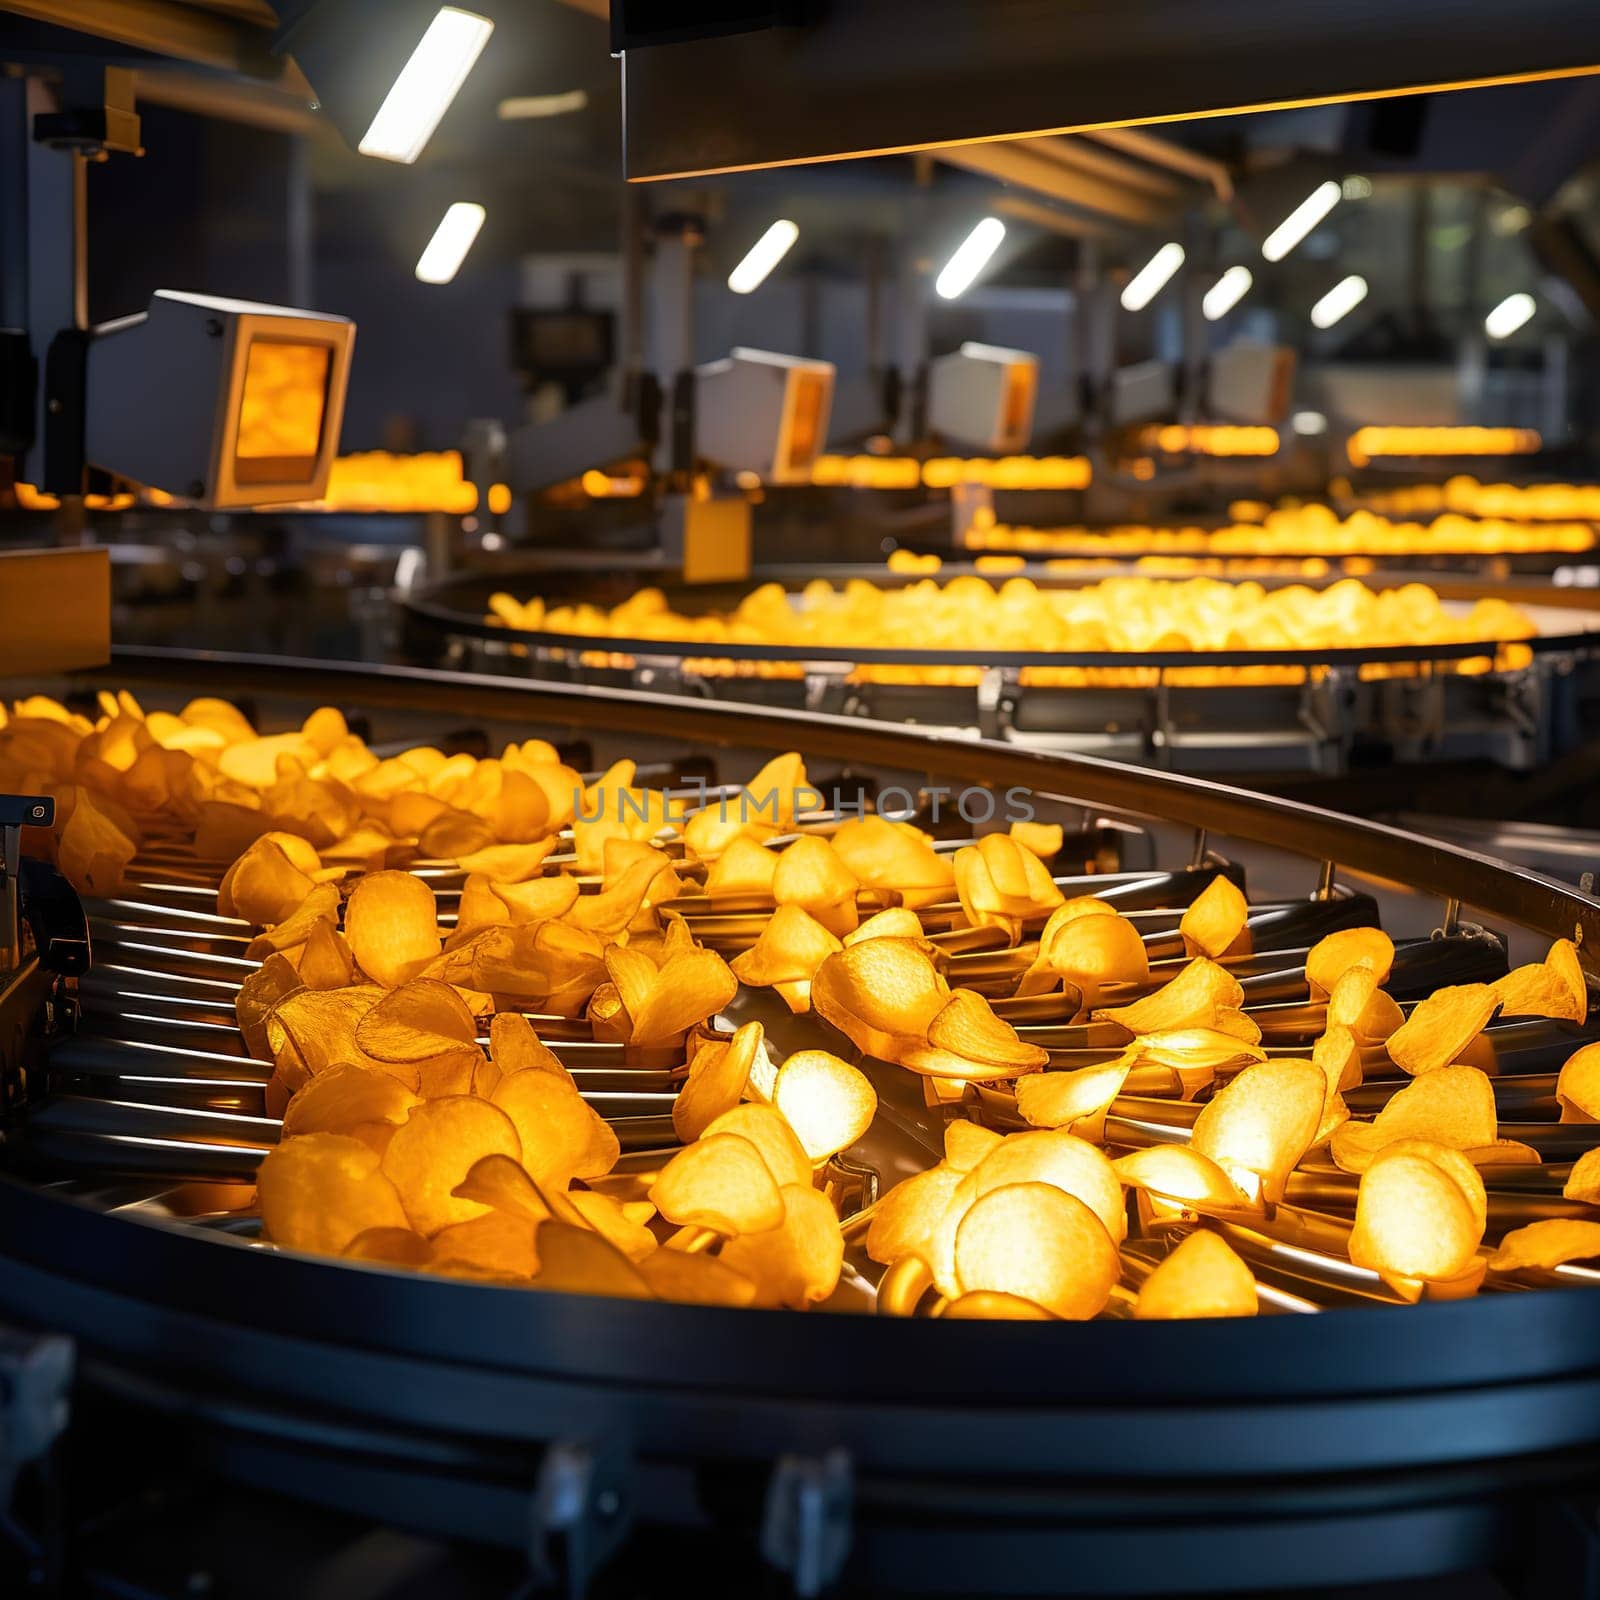 Production of potatoes chips, an industrial and food concept